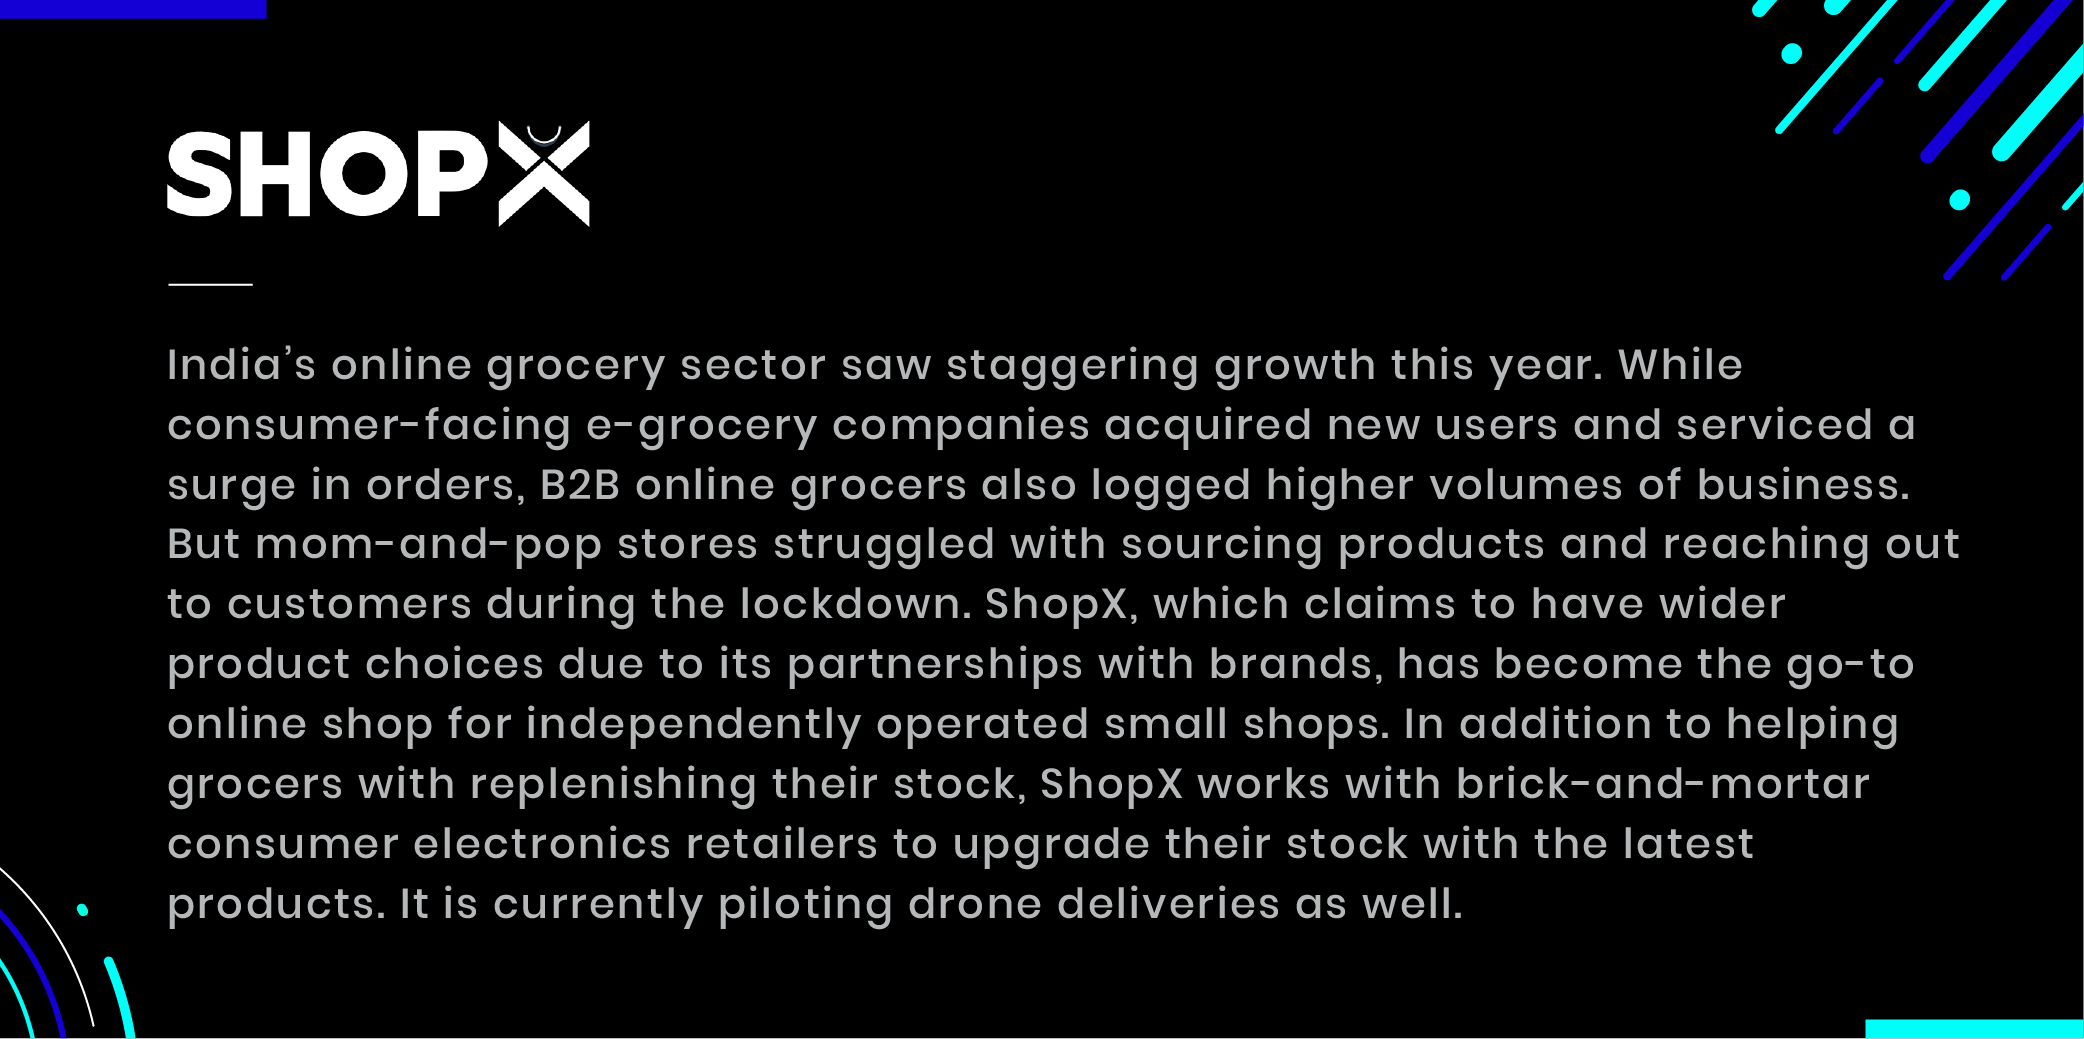 Shopx mom and pop stores online shop for independently owned small shops replenishing stock drone deliveries